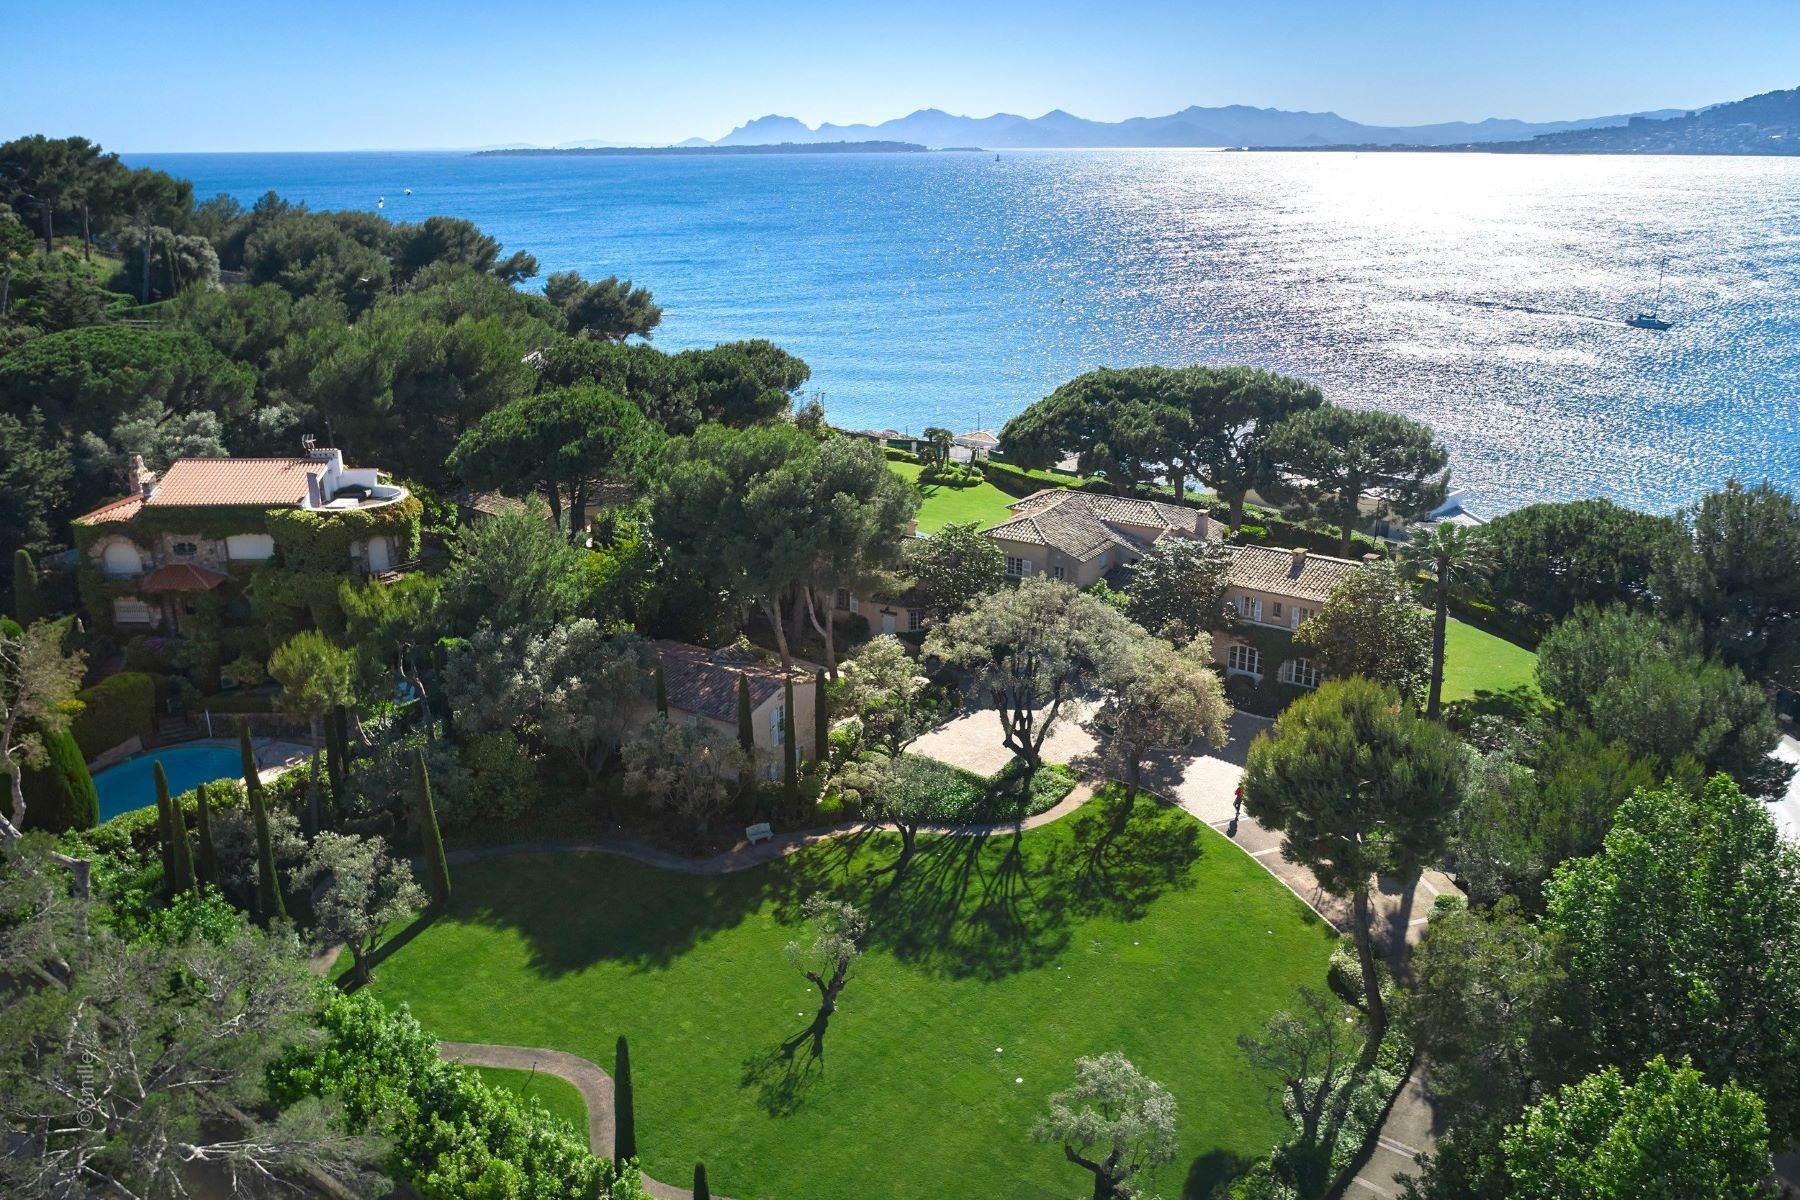 Single Family Homes for Sale at Luxurious private estate for sale located by the sea on Cap d’Antibes Cap D'Antibes, Provence-Alpes-Cote D'Azur 06160 France